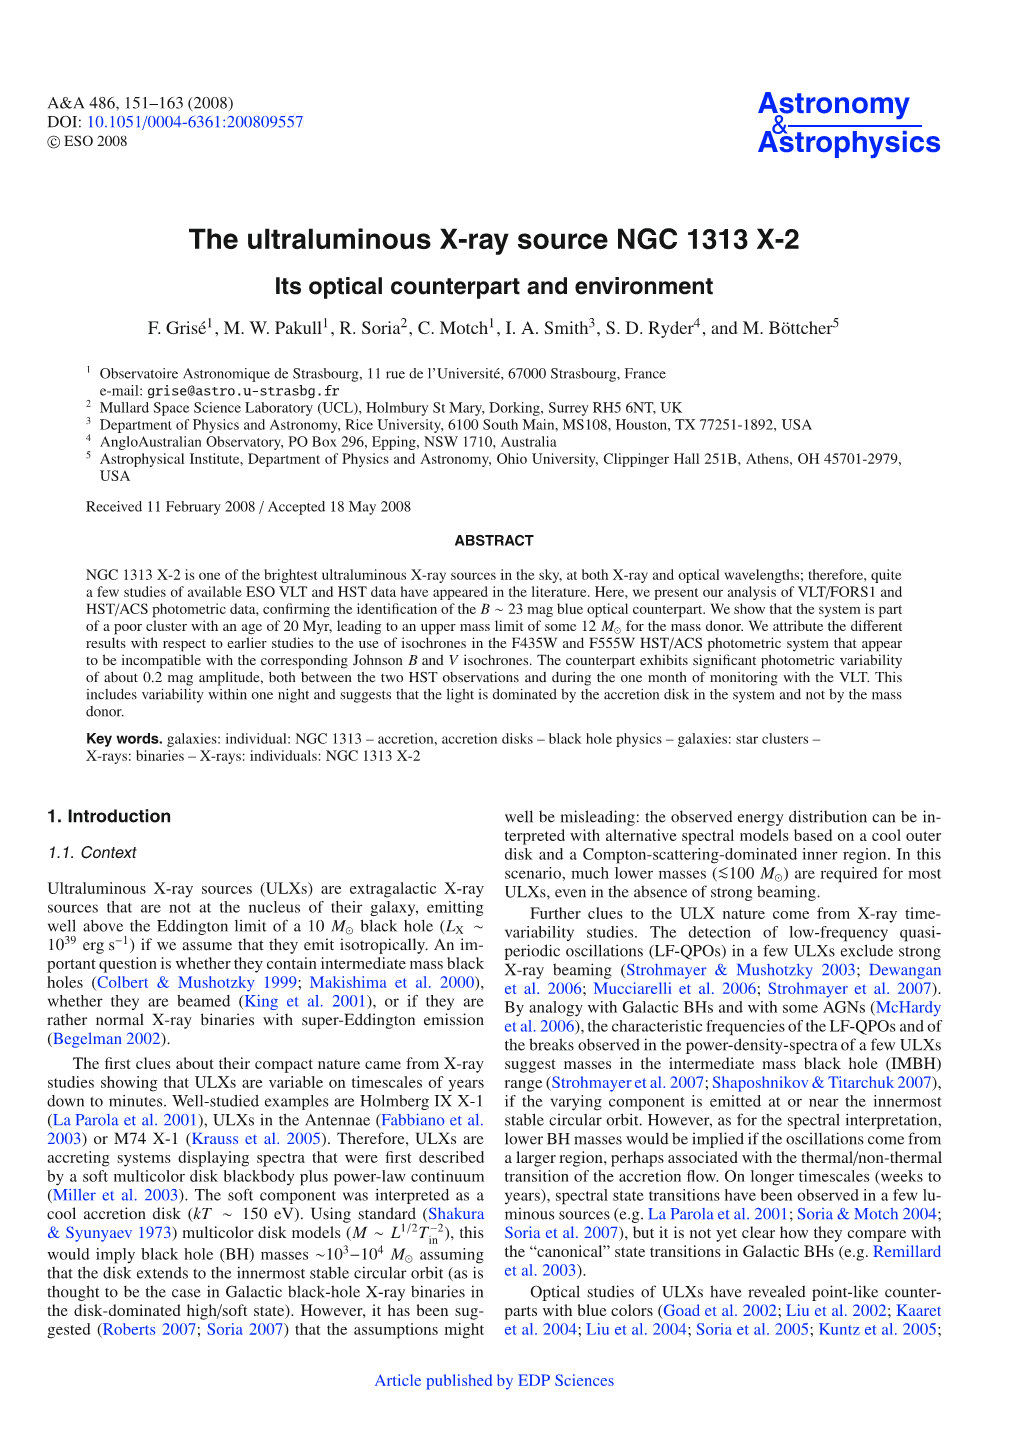 The Ultraluminous X-Ray Source NGC 1313 X-2 Its Optical Counterpart and Environment